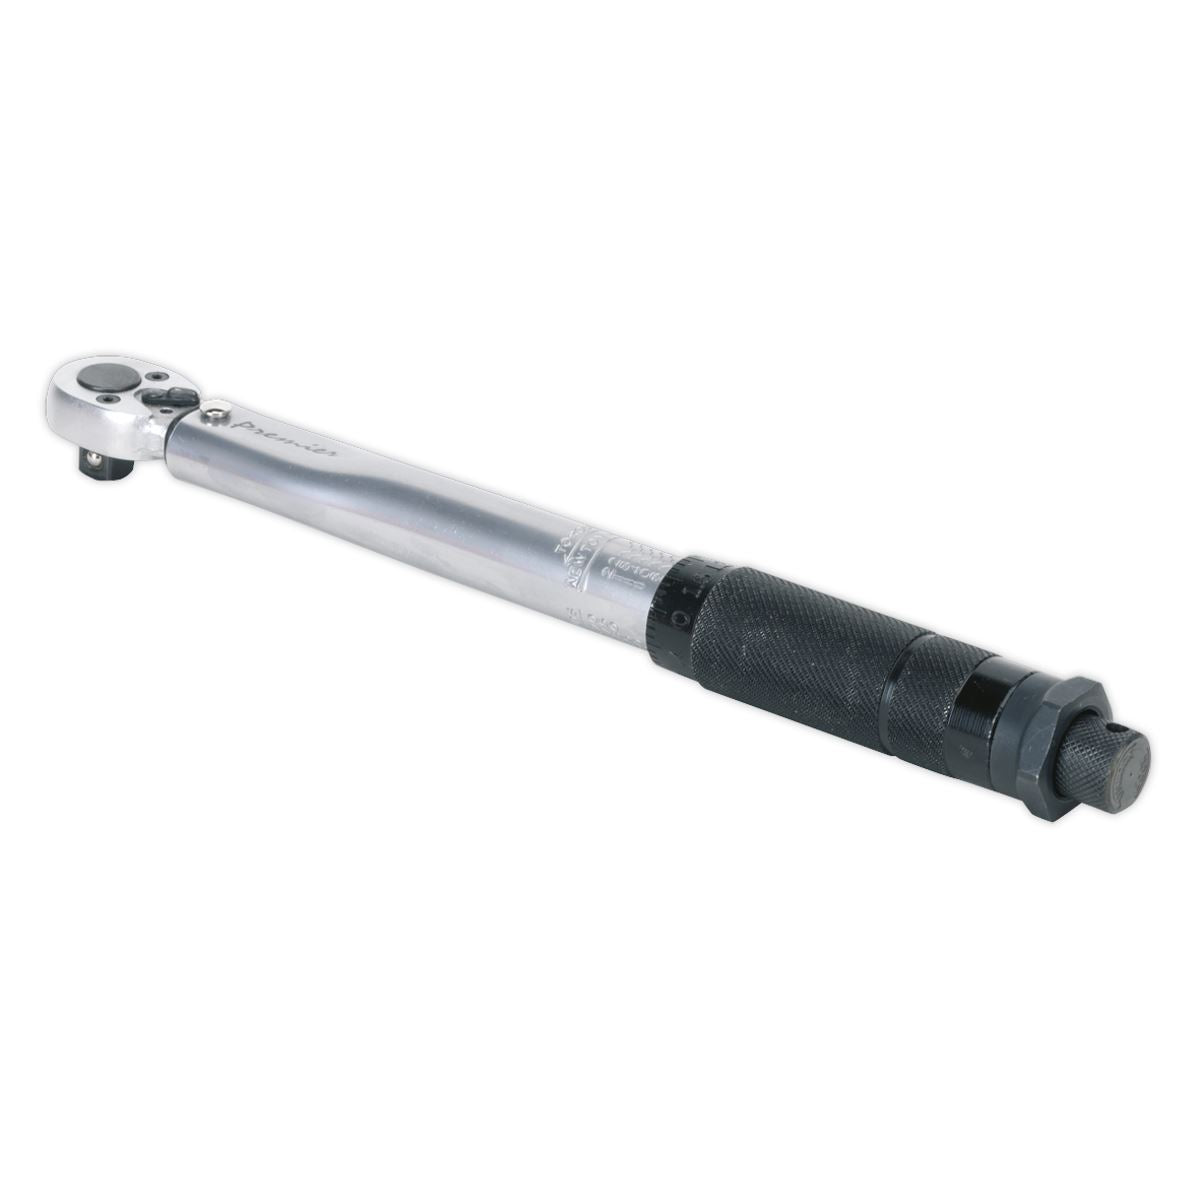 Sealey Premier Torque Wrench Micrometer Style 3/8"Sq Drive 2-24Nm(1.47-17.70lb.ft) - Calibrated